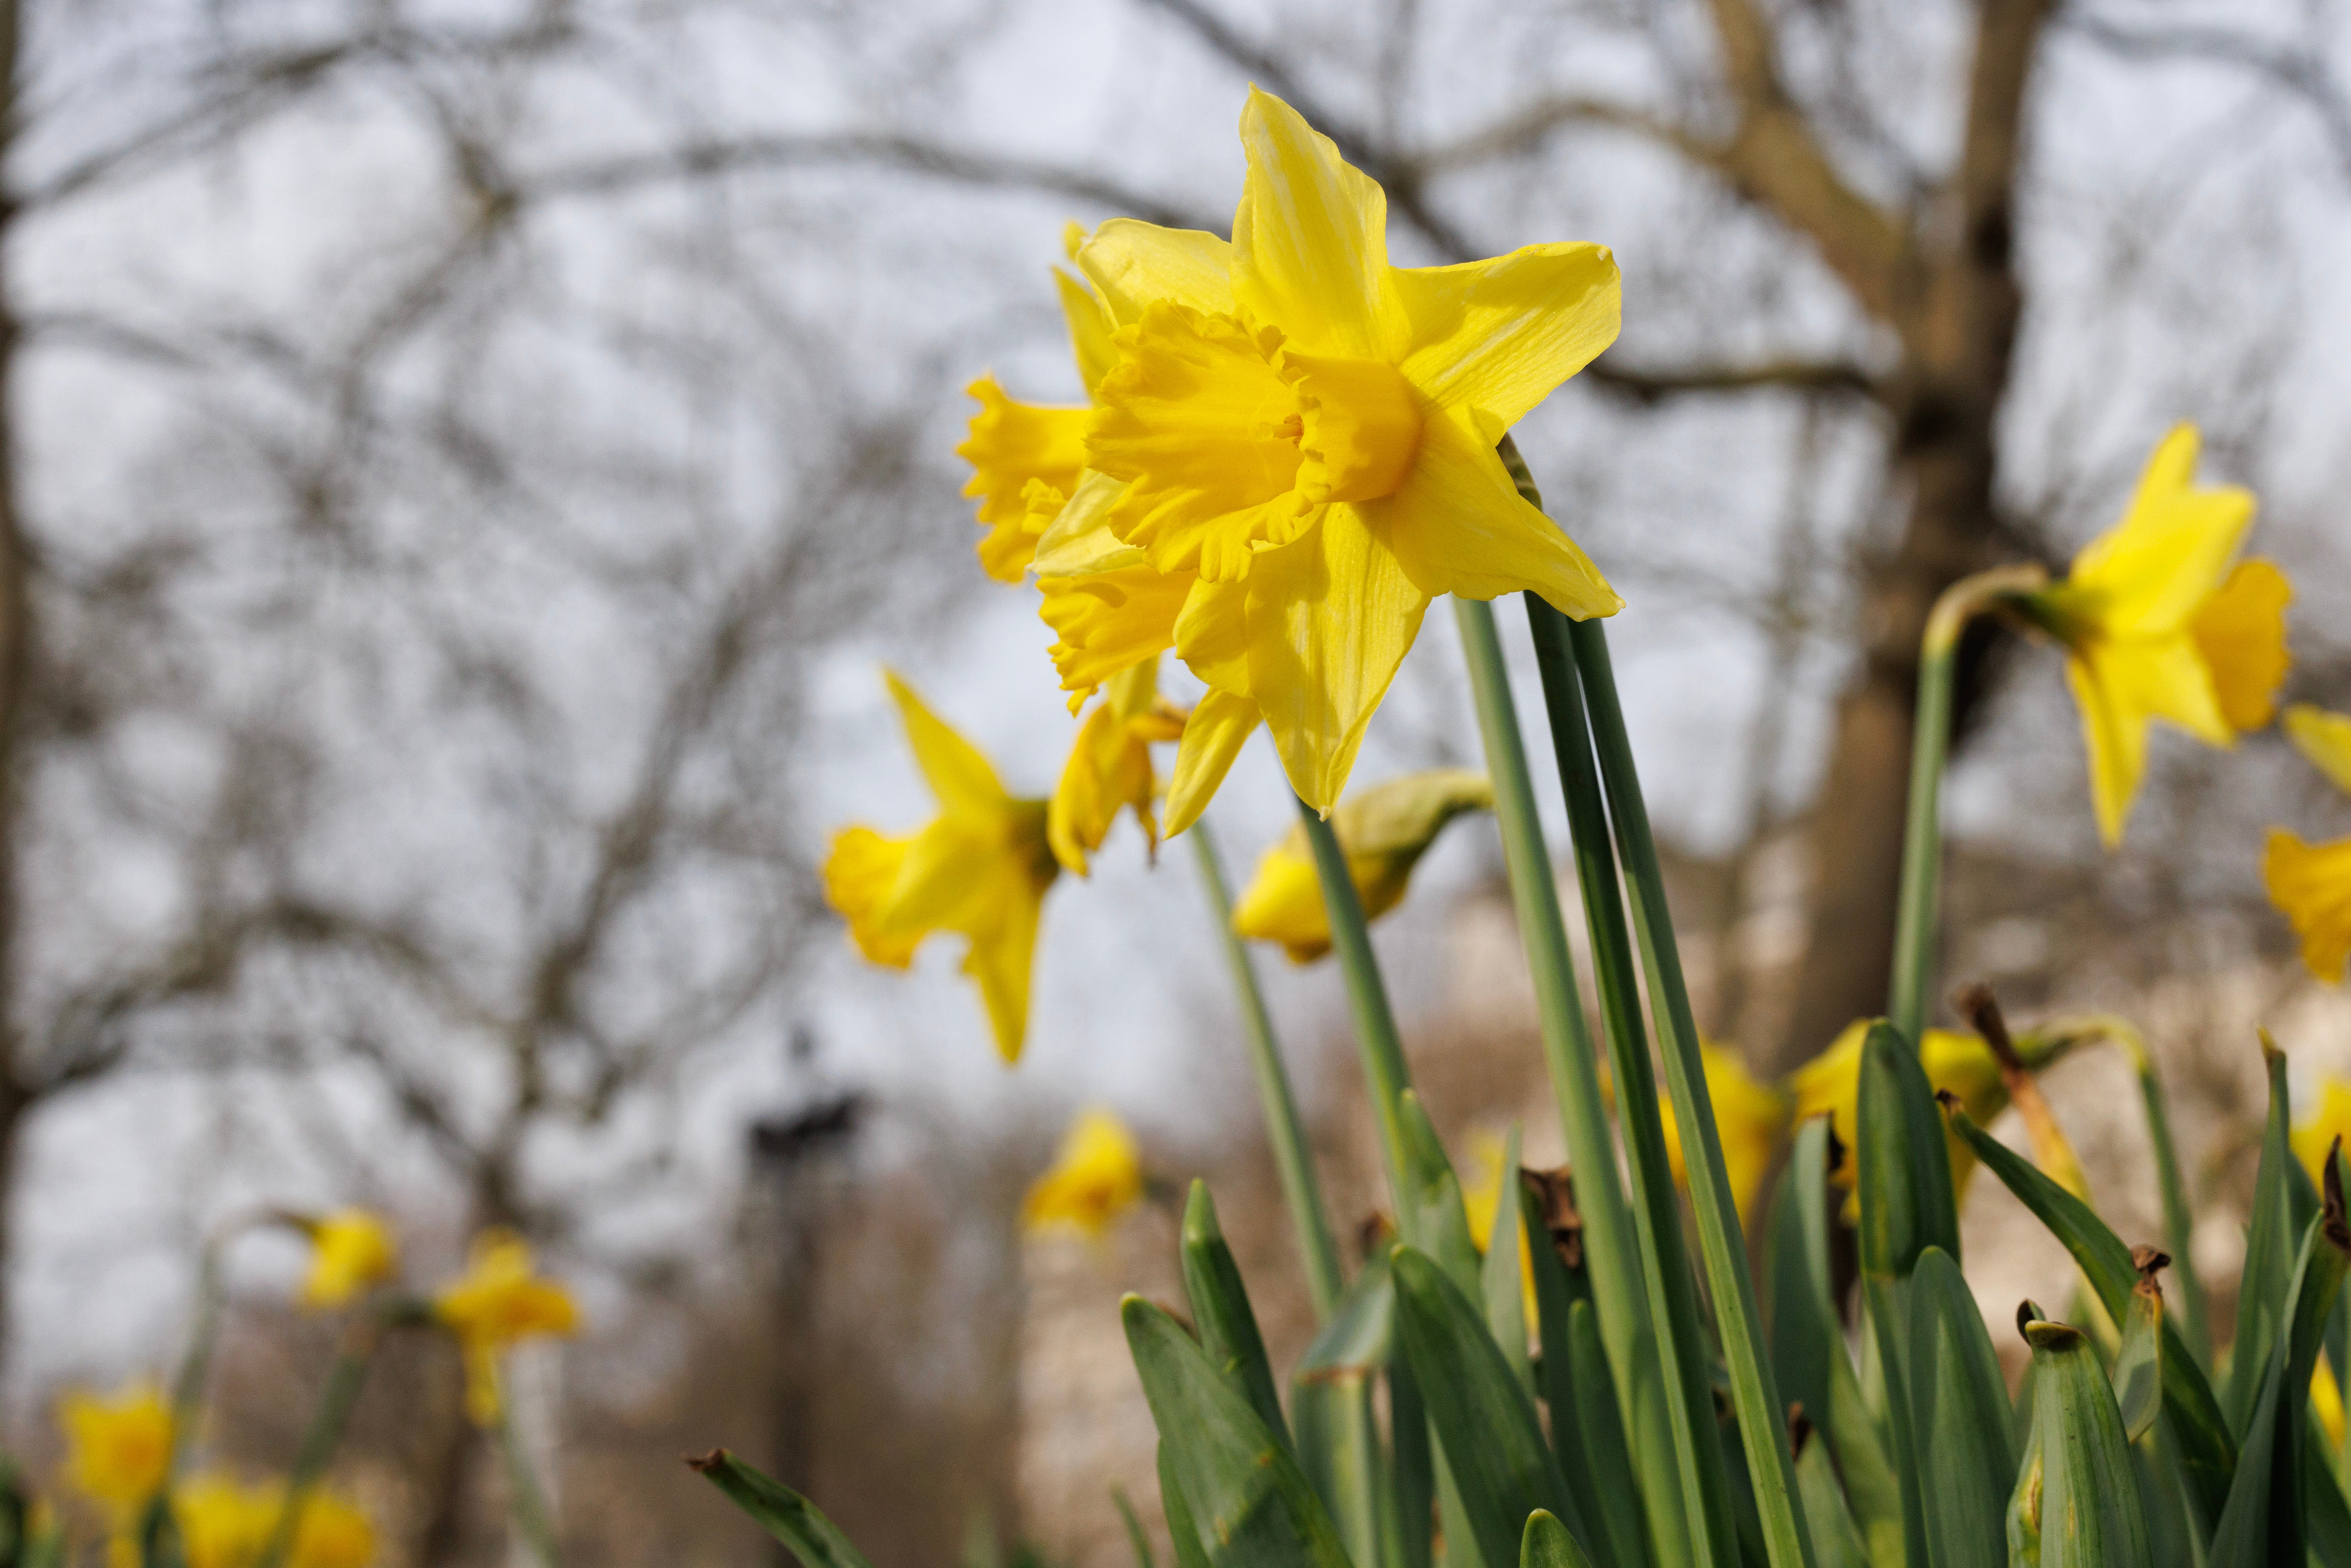 Gloucestershire ‘golden triangle’ is known for its daffodil displays